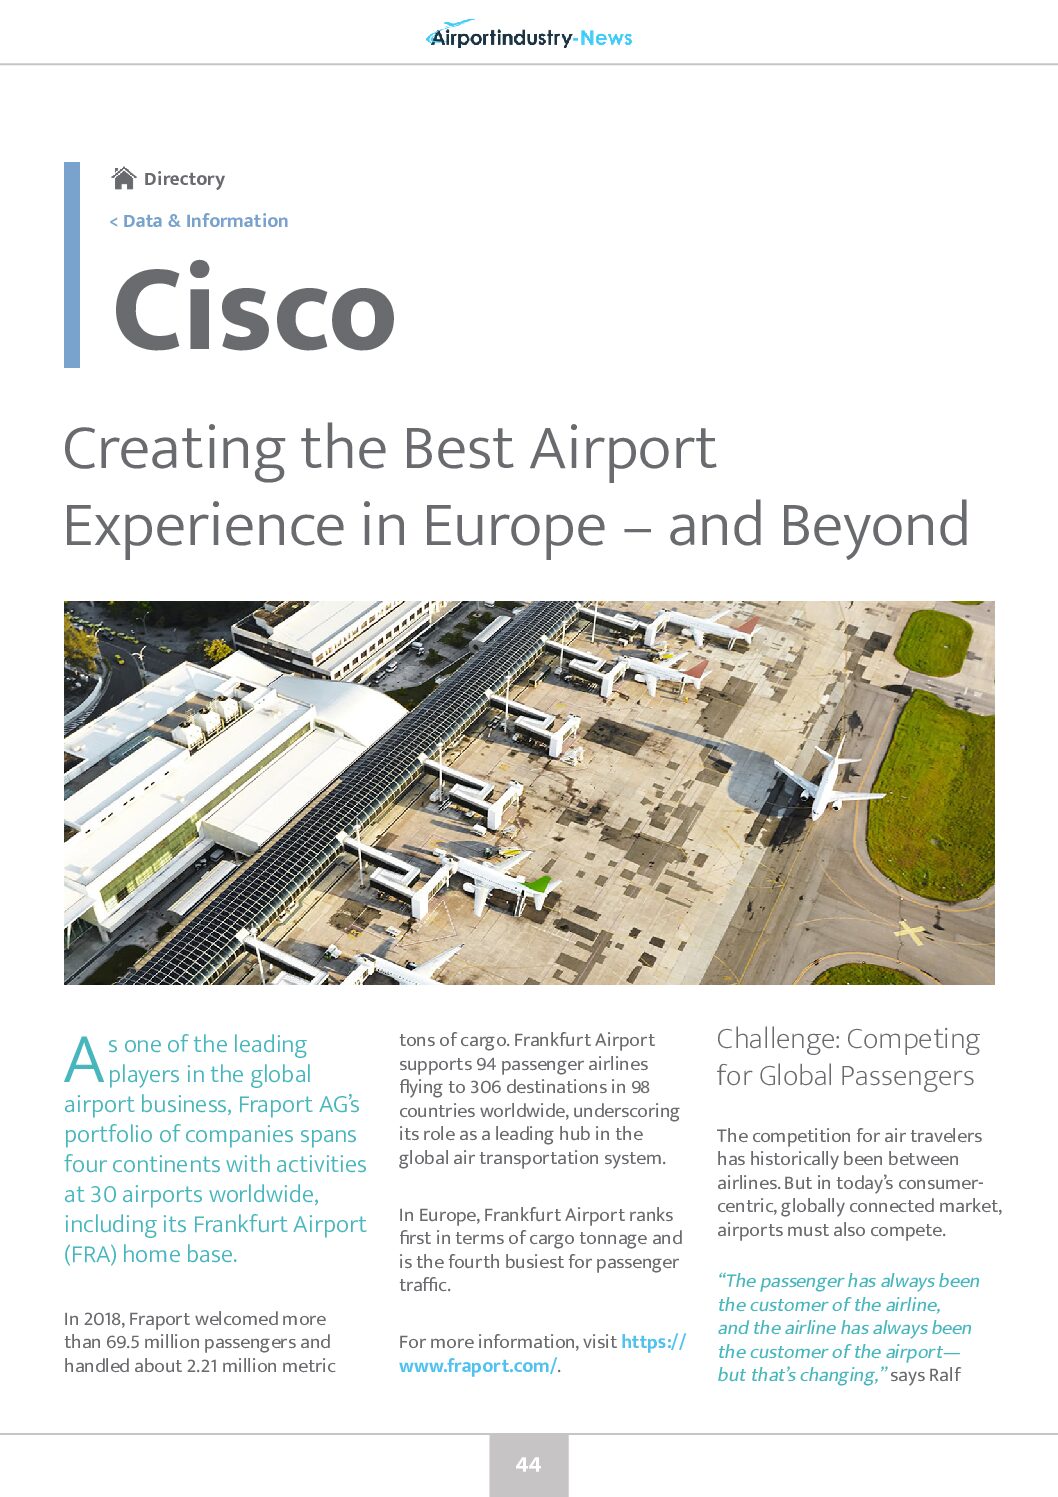 Creating the Best Airport Experience in Europe – and Beyond